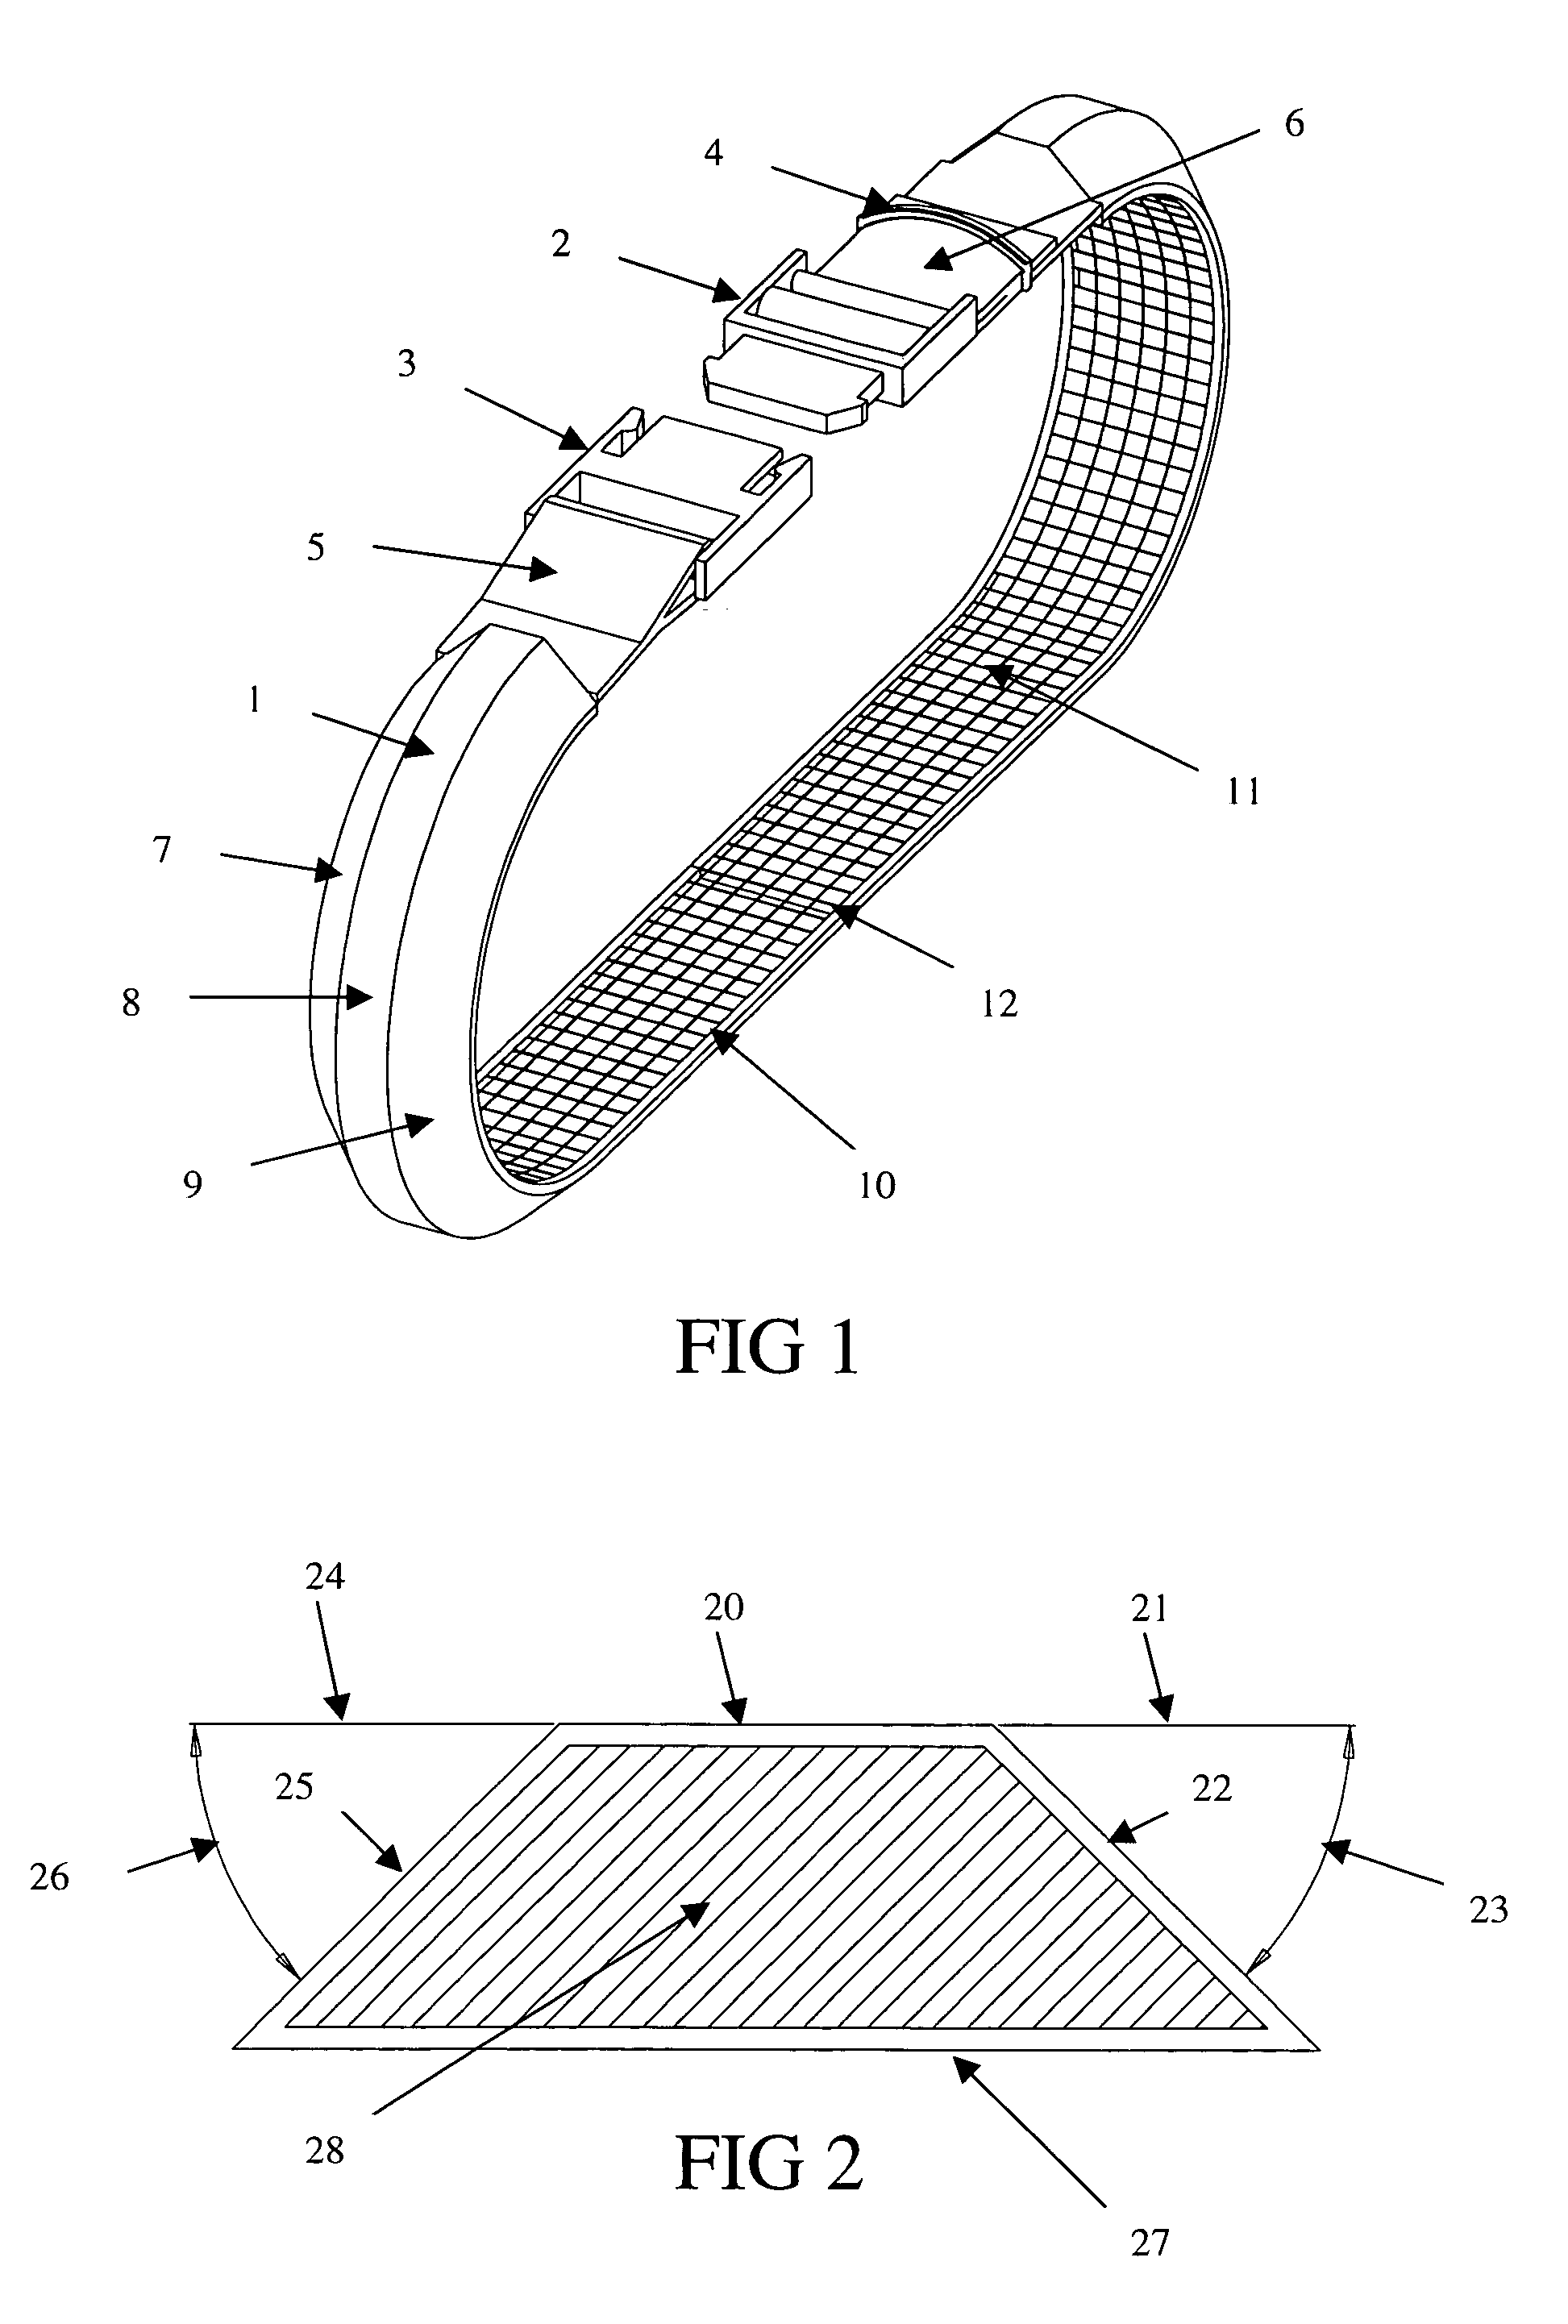 Three-dimensional reflective collar with a tiered force releasable buckle and parasitic protection band support